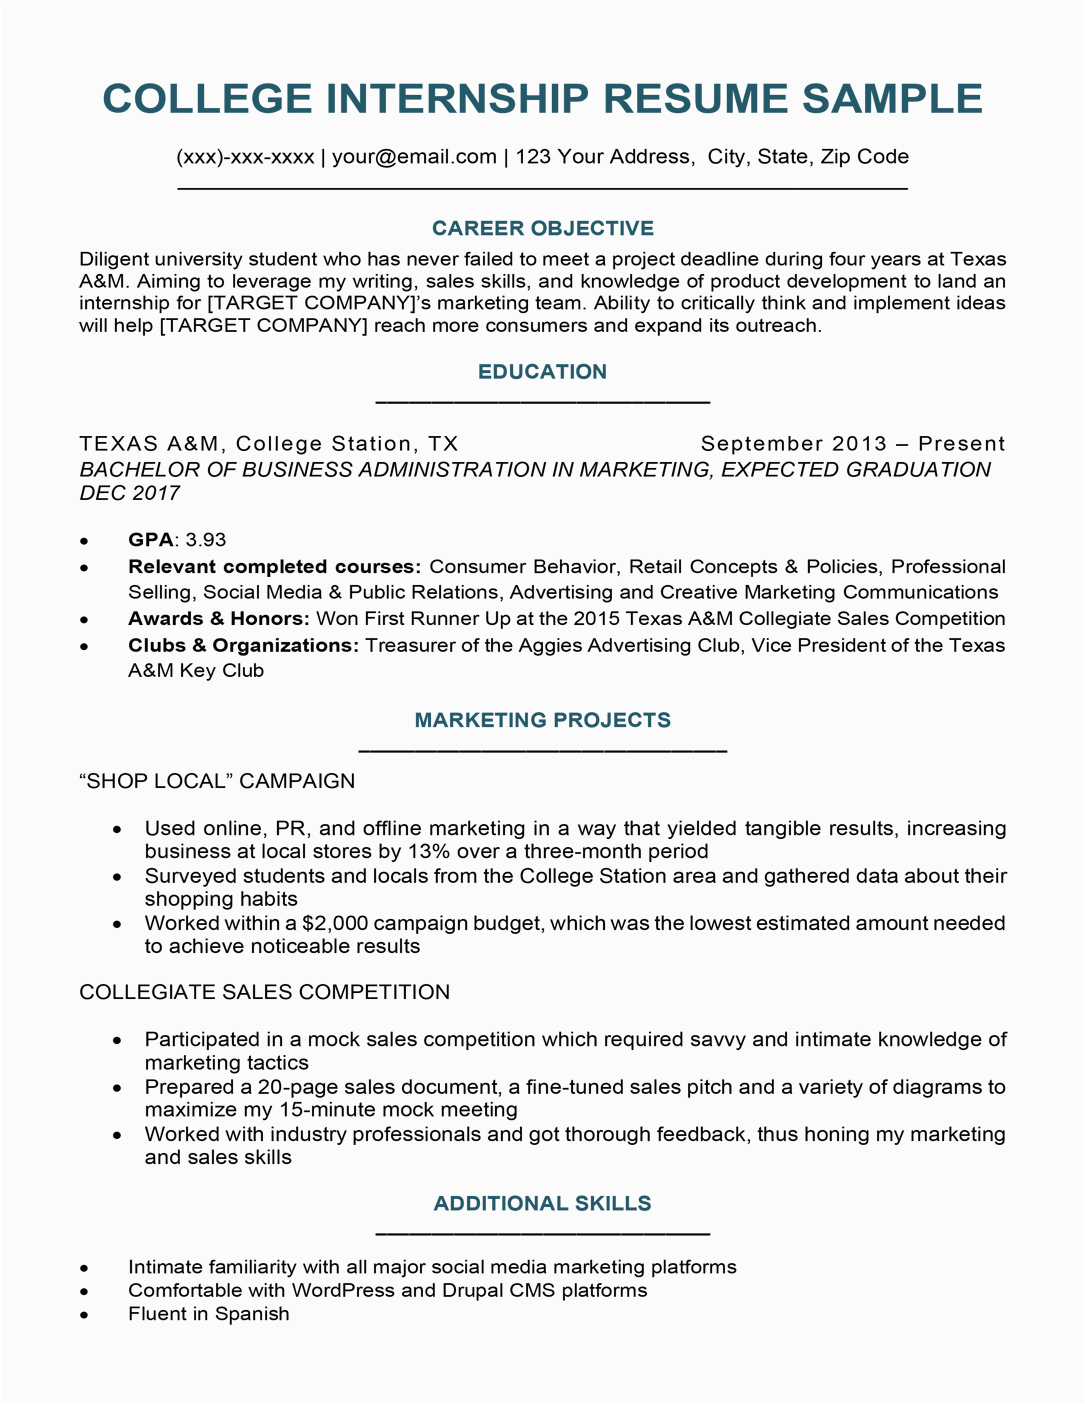 Sample Resume for Business College Student College Student Resume Sample & Writing Tips